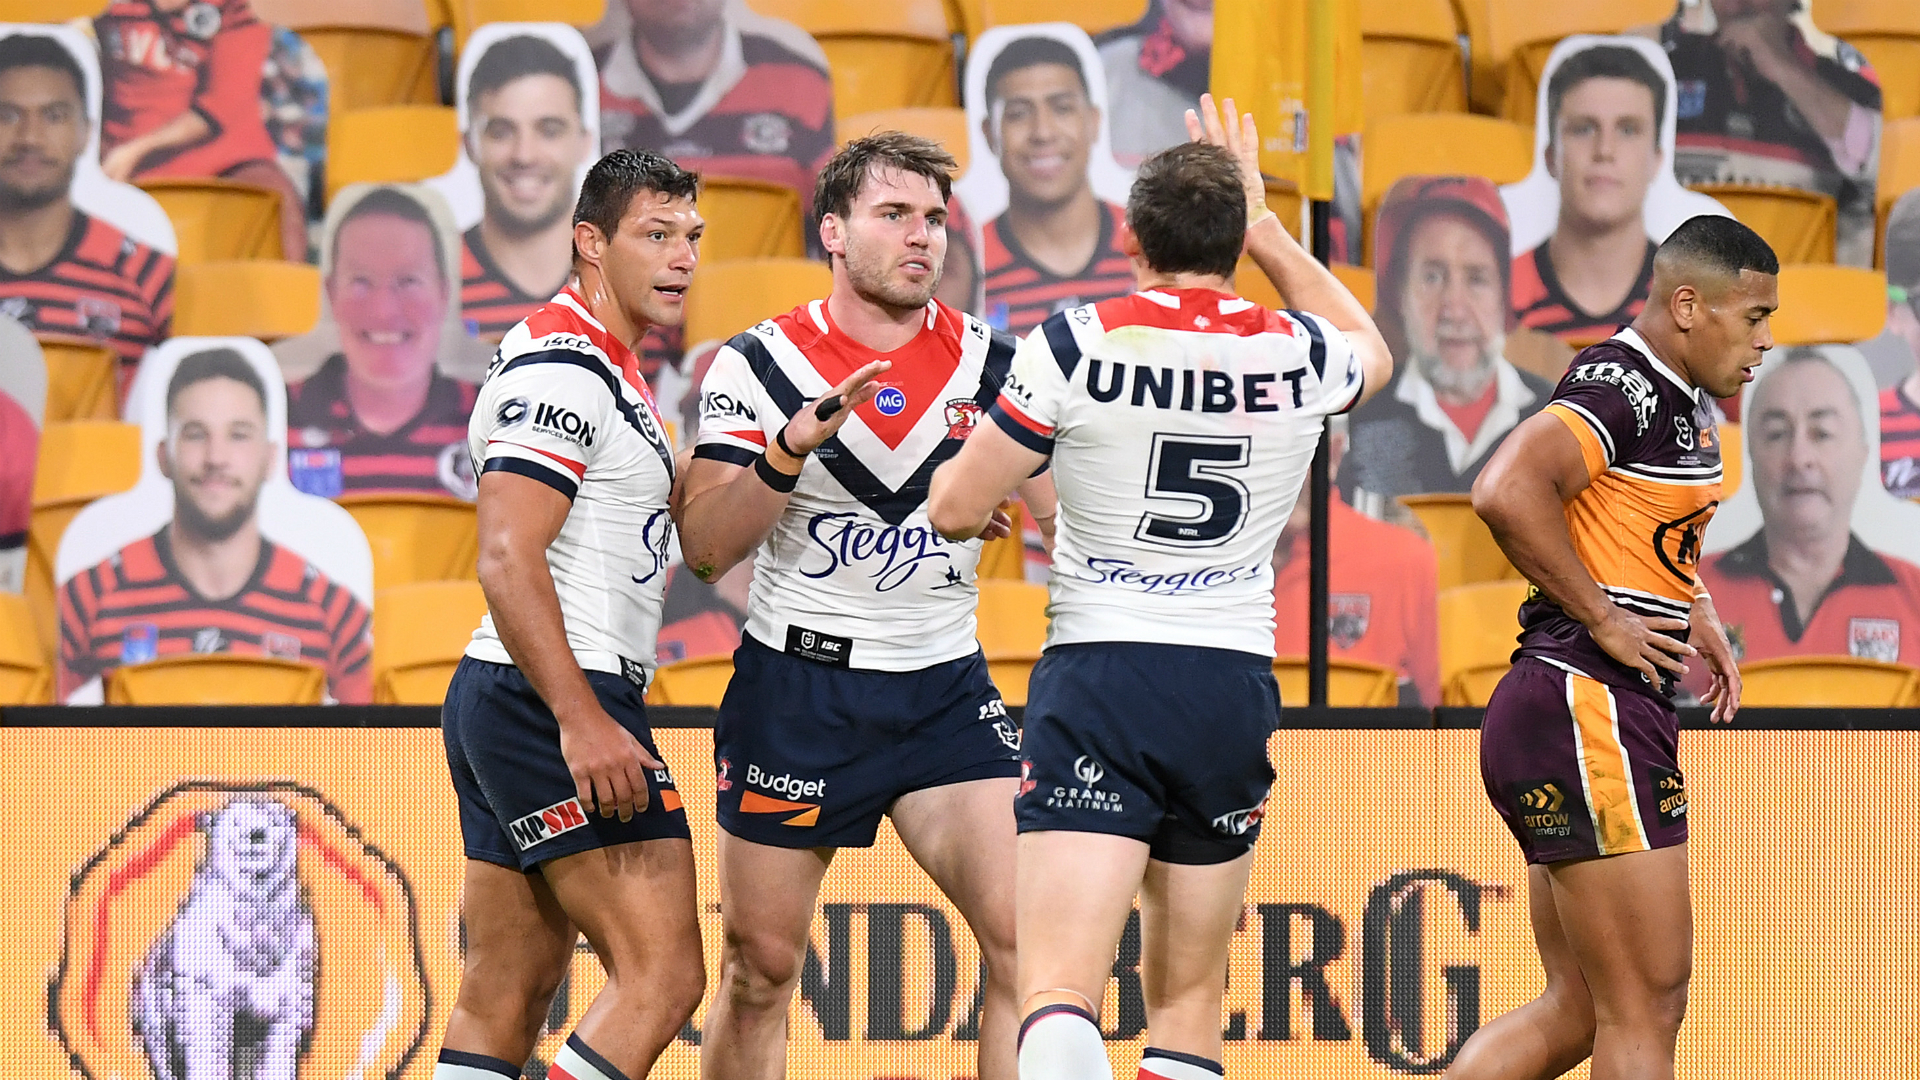 Brisbane Broncos suffered their worst NRL defeat as Sydney Roosters turned on the style at Suncorp Stadium.